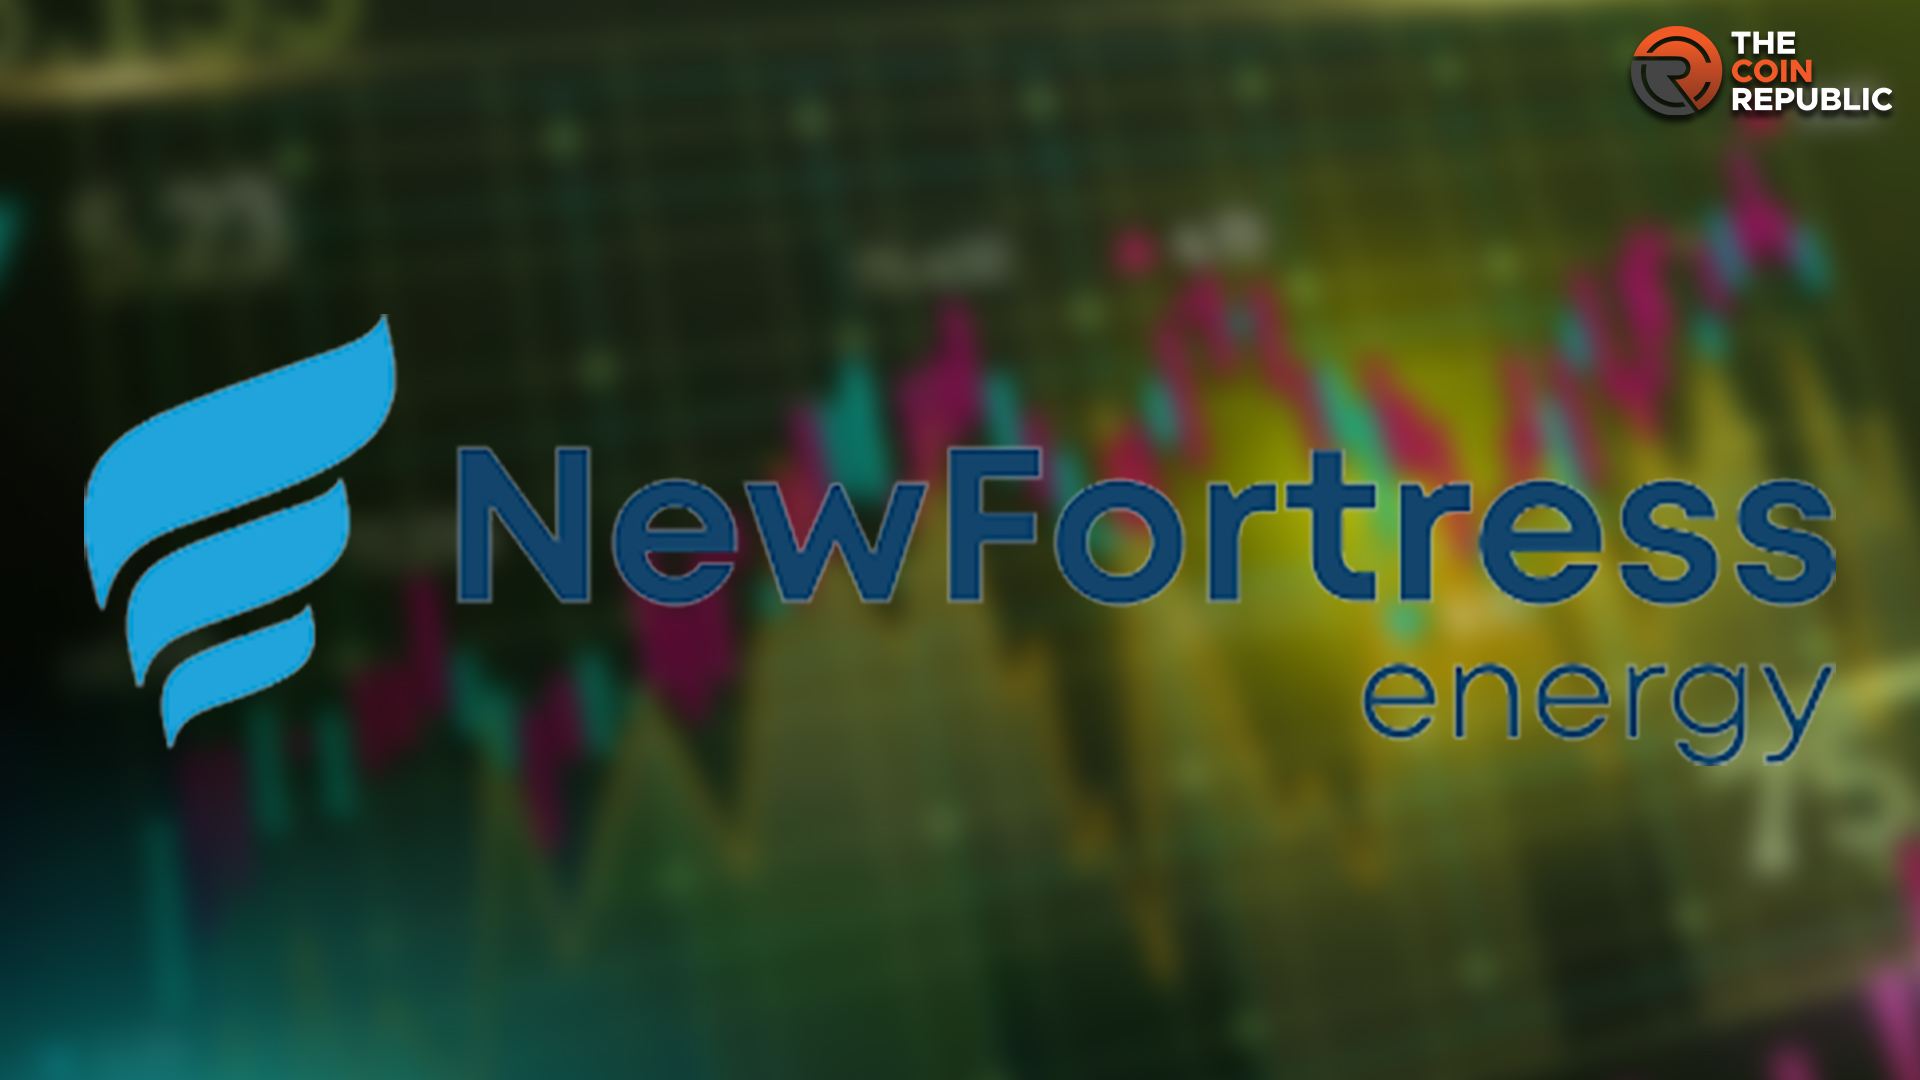 New Fortress Energy Stock Price Prediction: What’s Next For NFE?